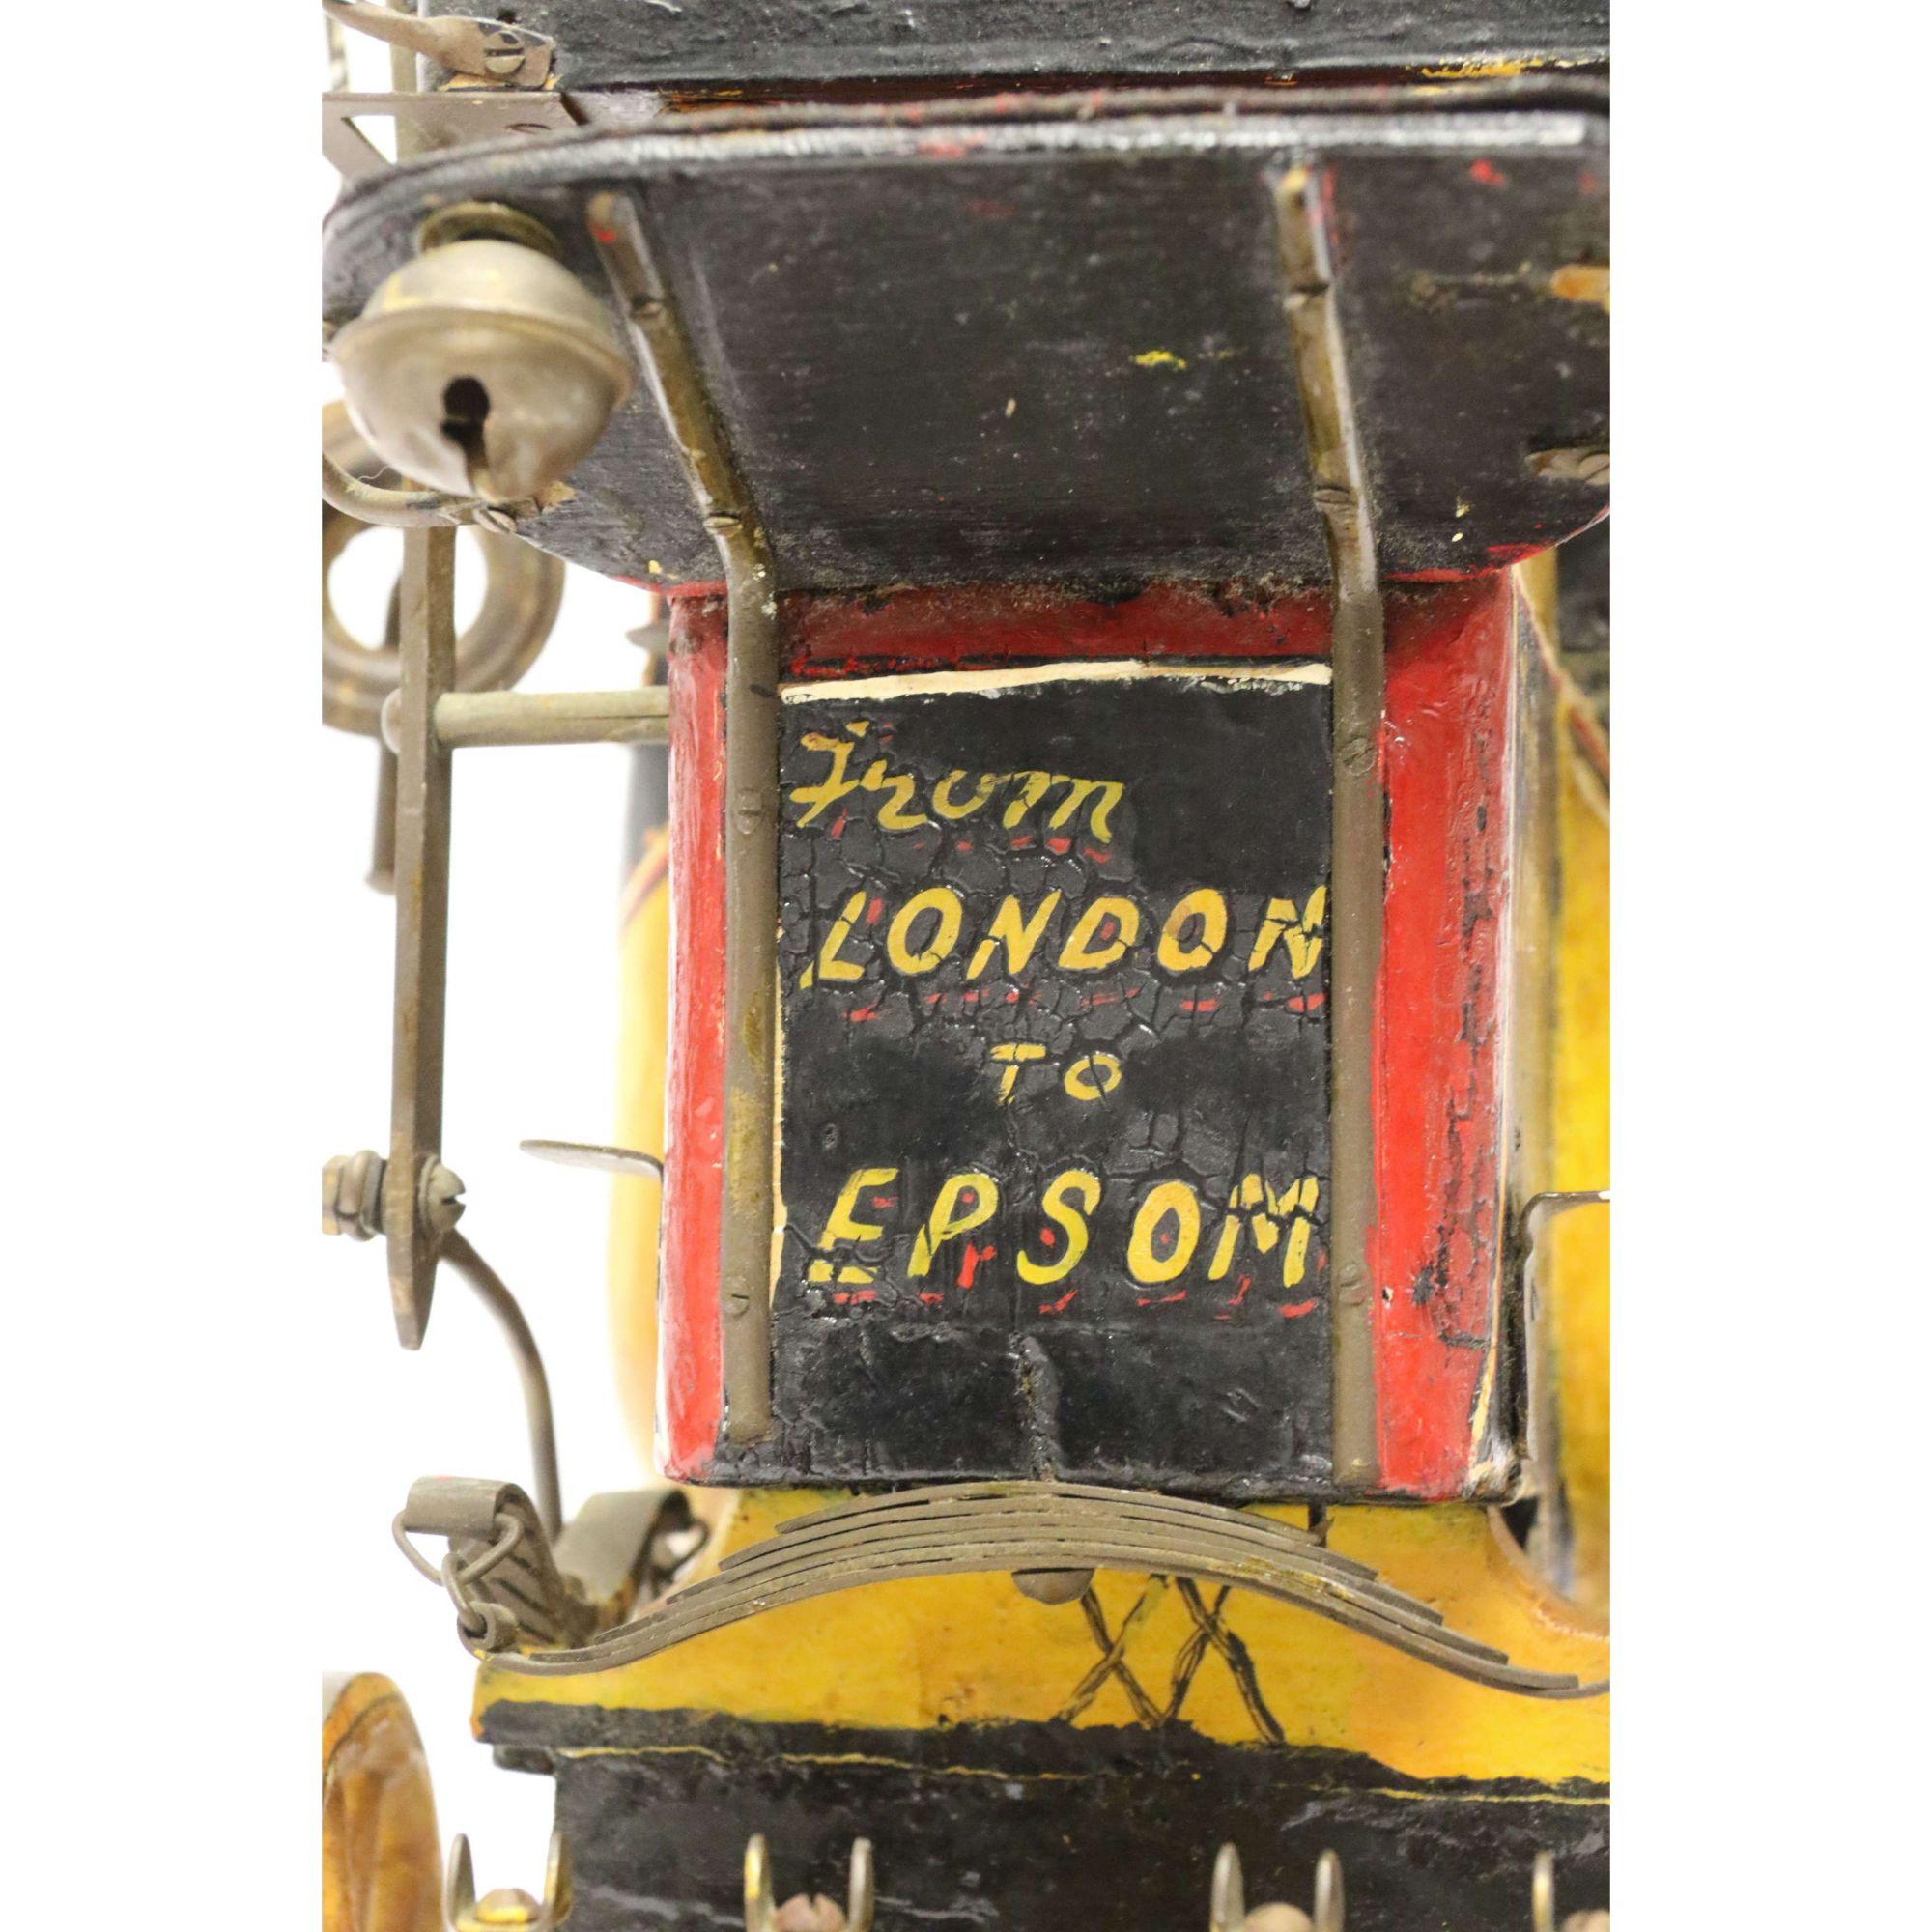  English Model of an 18th Century London to Epsom Stagecoach, Edwardian Period 4